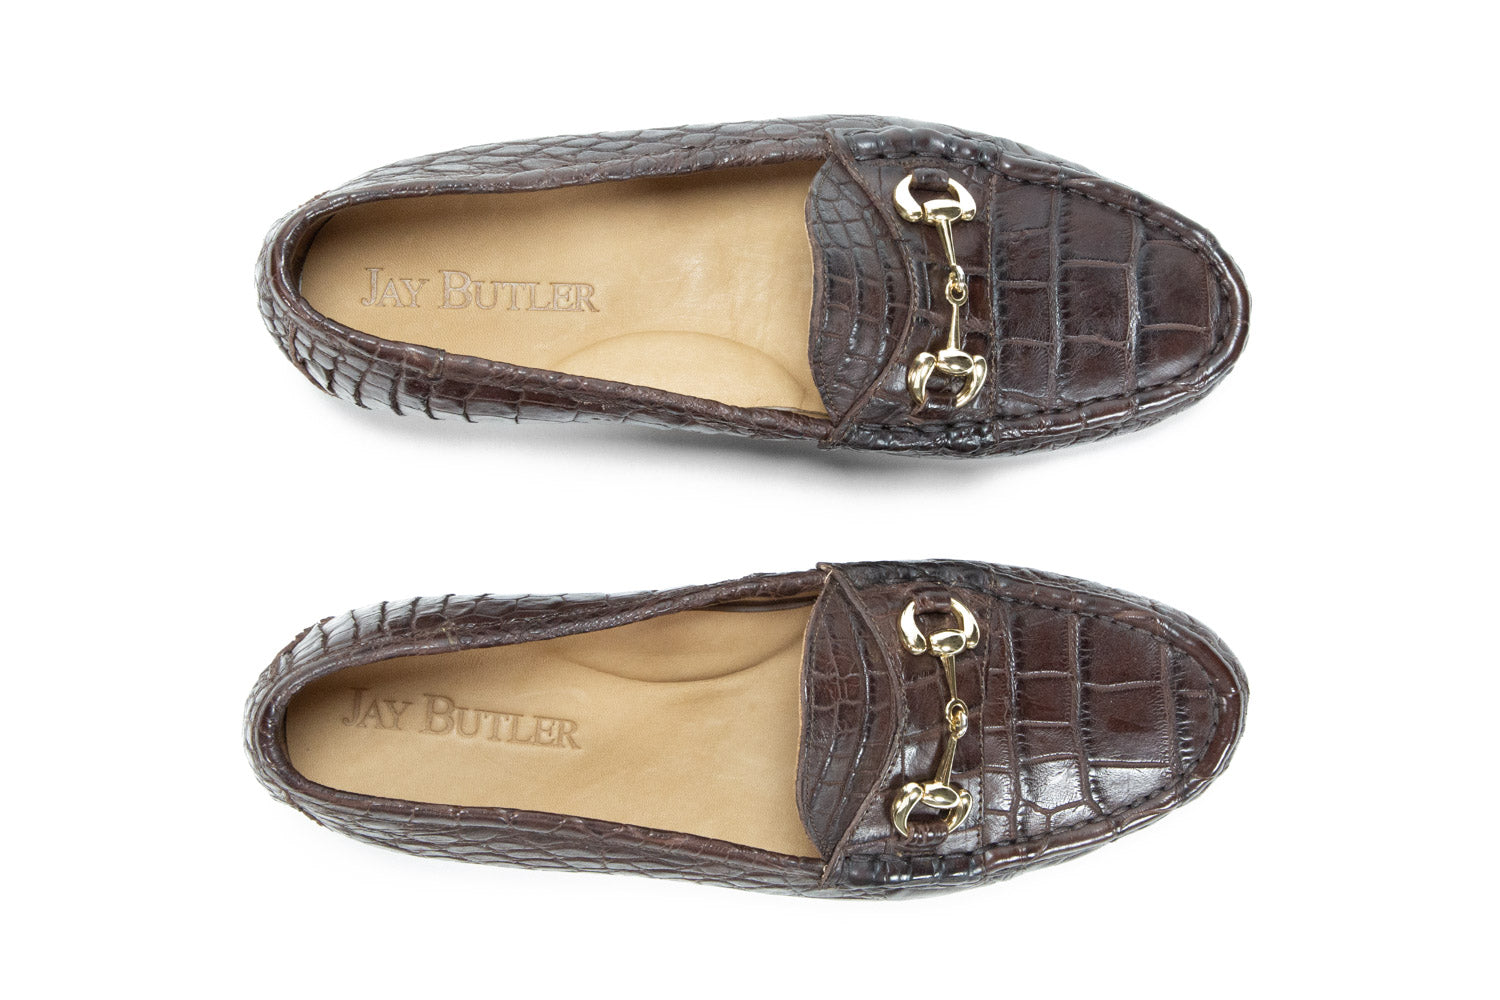 Andy Démesure Alligator Leather Loafer